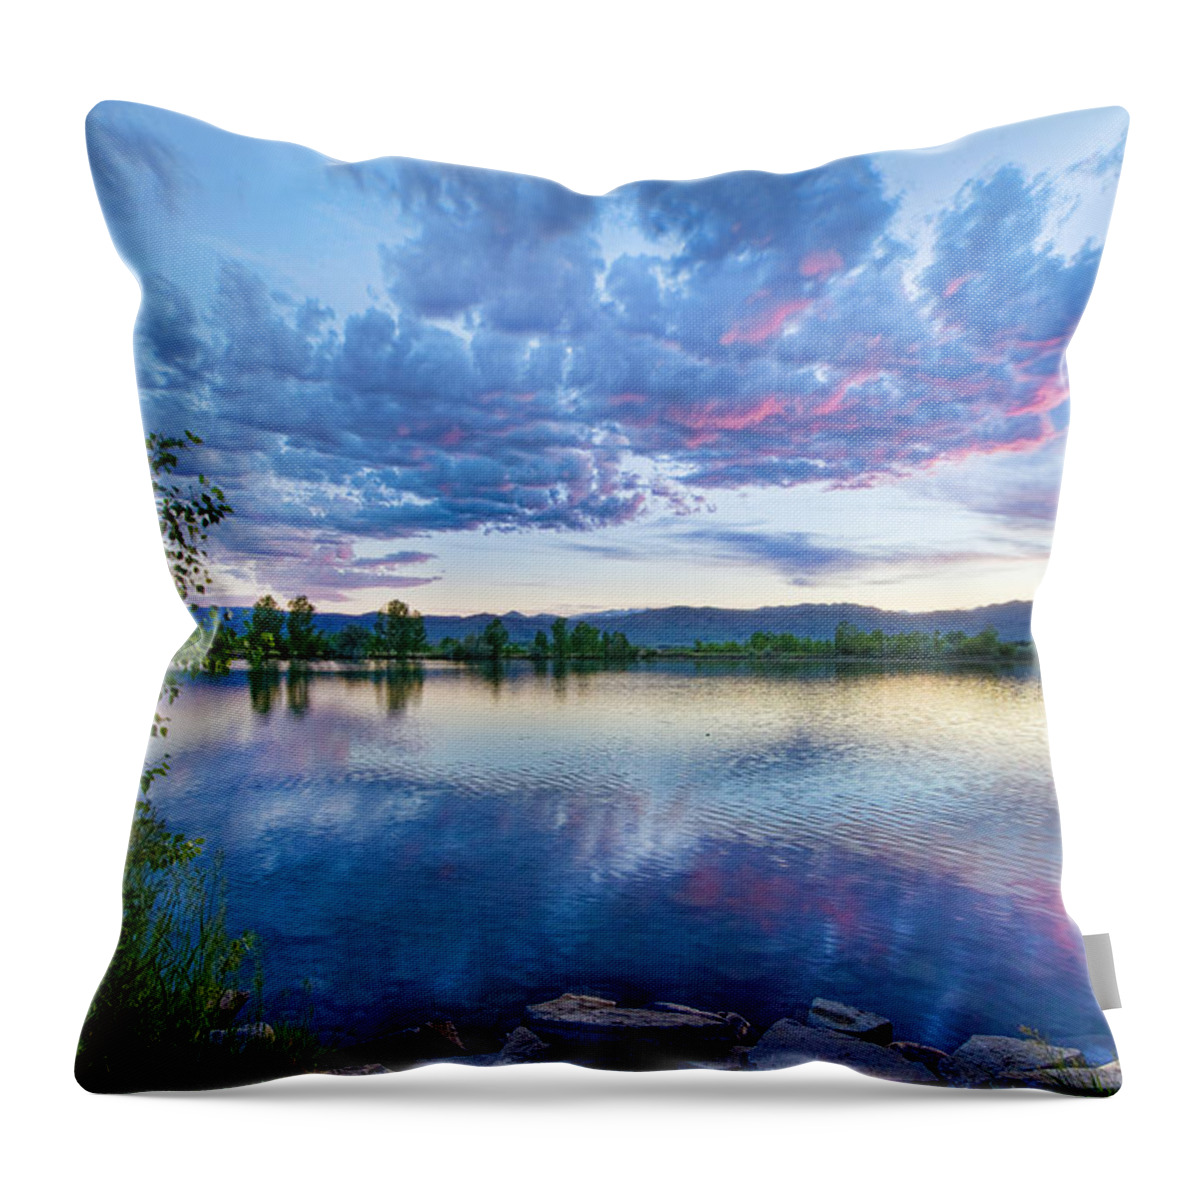 Reflections Throw Pillow featuring the photograph Coot Lake View by James BO Insogna